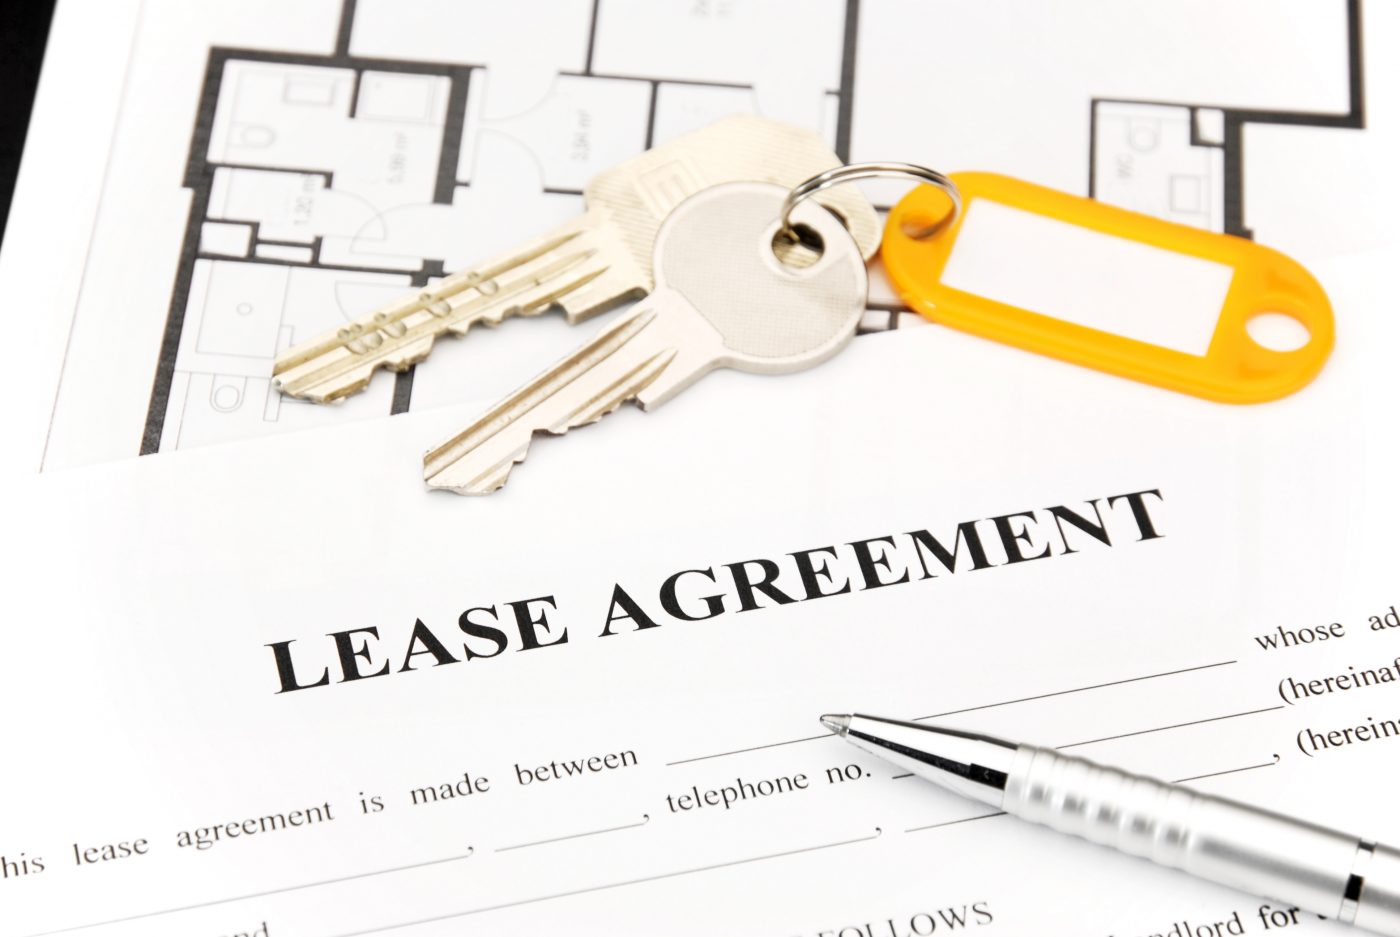 Lease agreement and keys